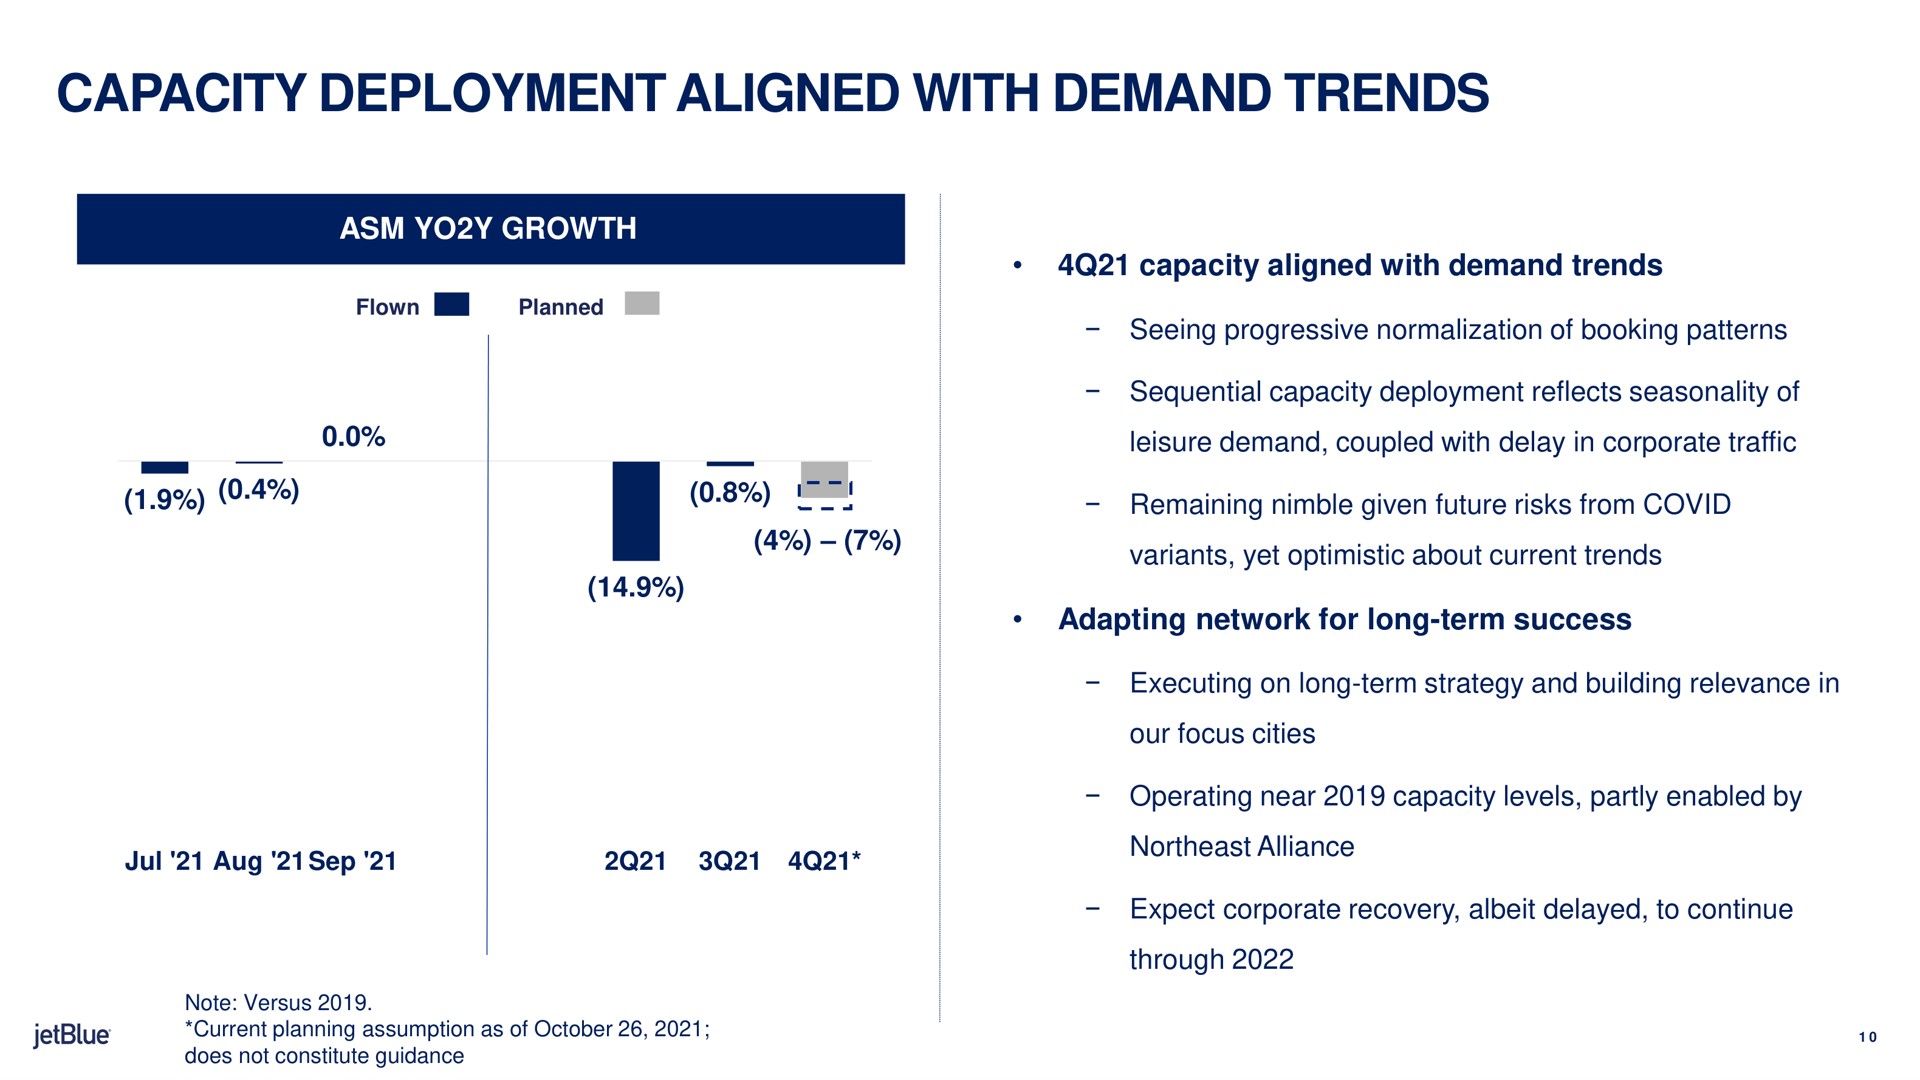 capacity deployment aligned with demand trends northeast alliance | jetBlue